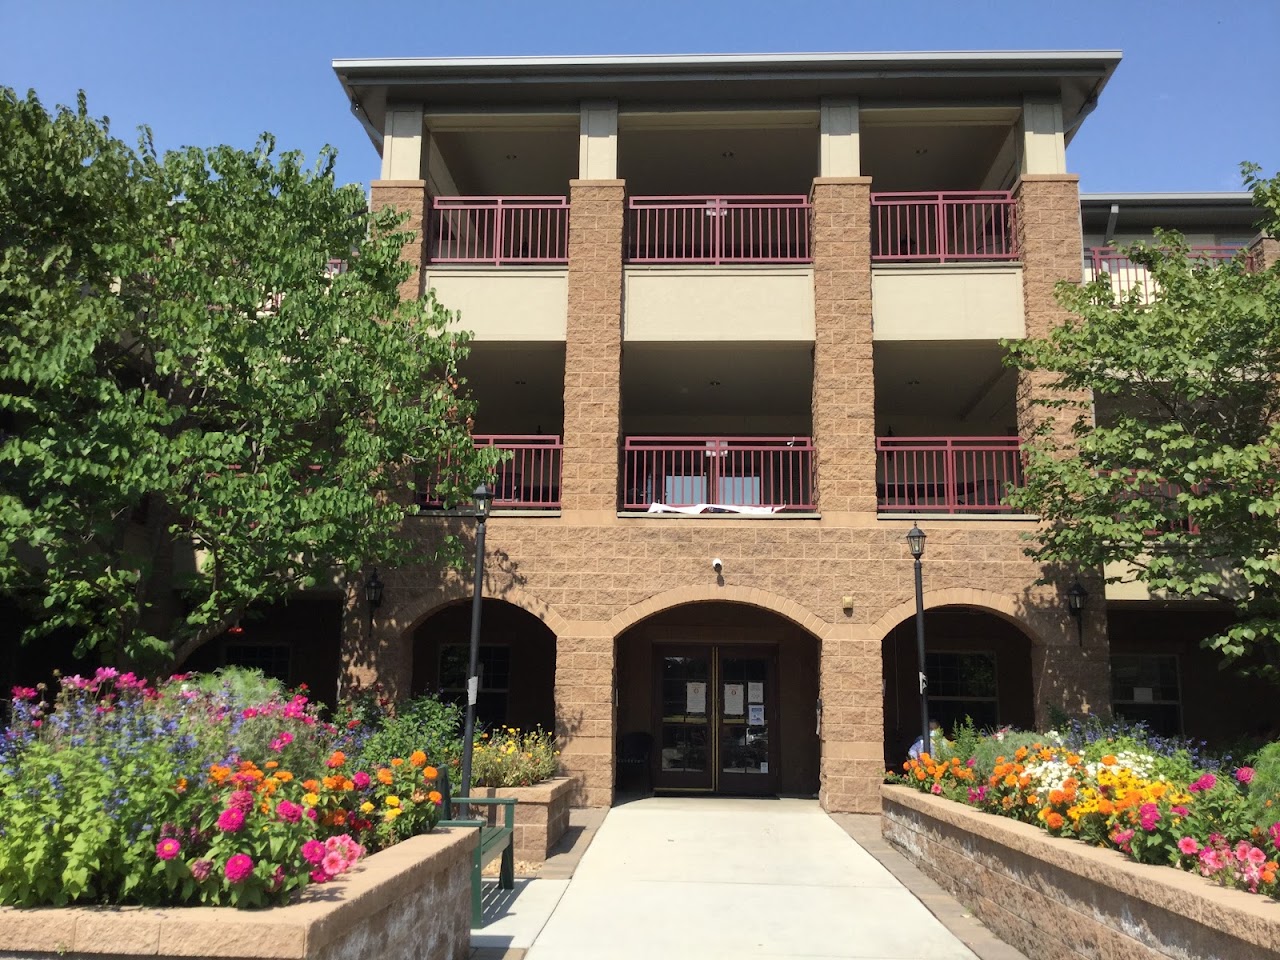 Photo of GRANVILLE ASSISTED LIVING FACILITY. Affordable housing located at 1325 VANCE ST LAKEWOOD, CO 80214